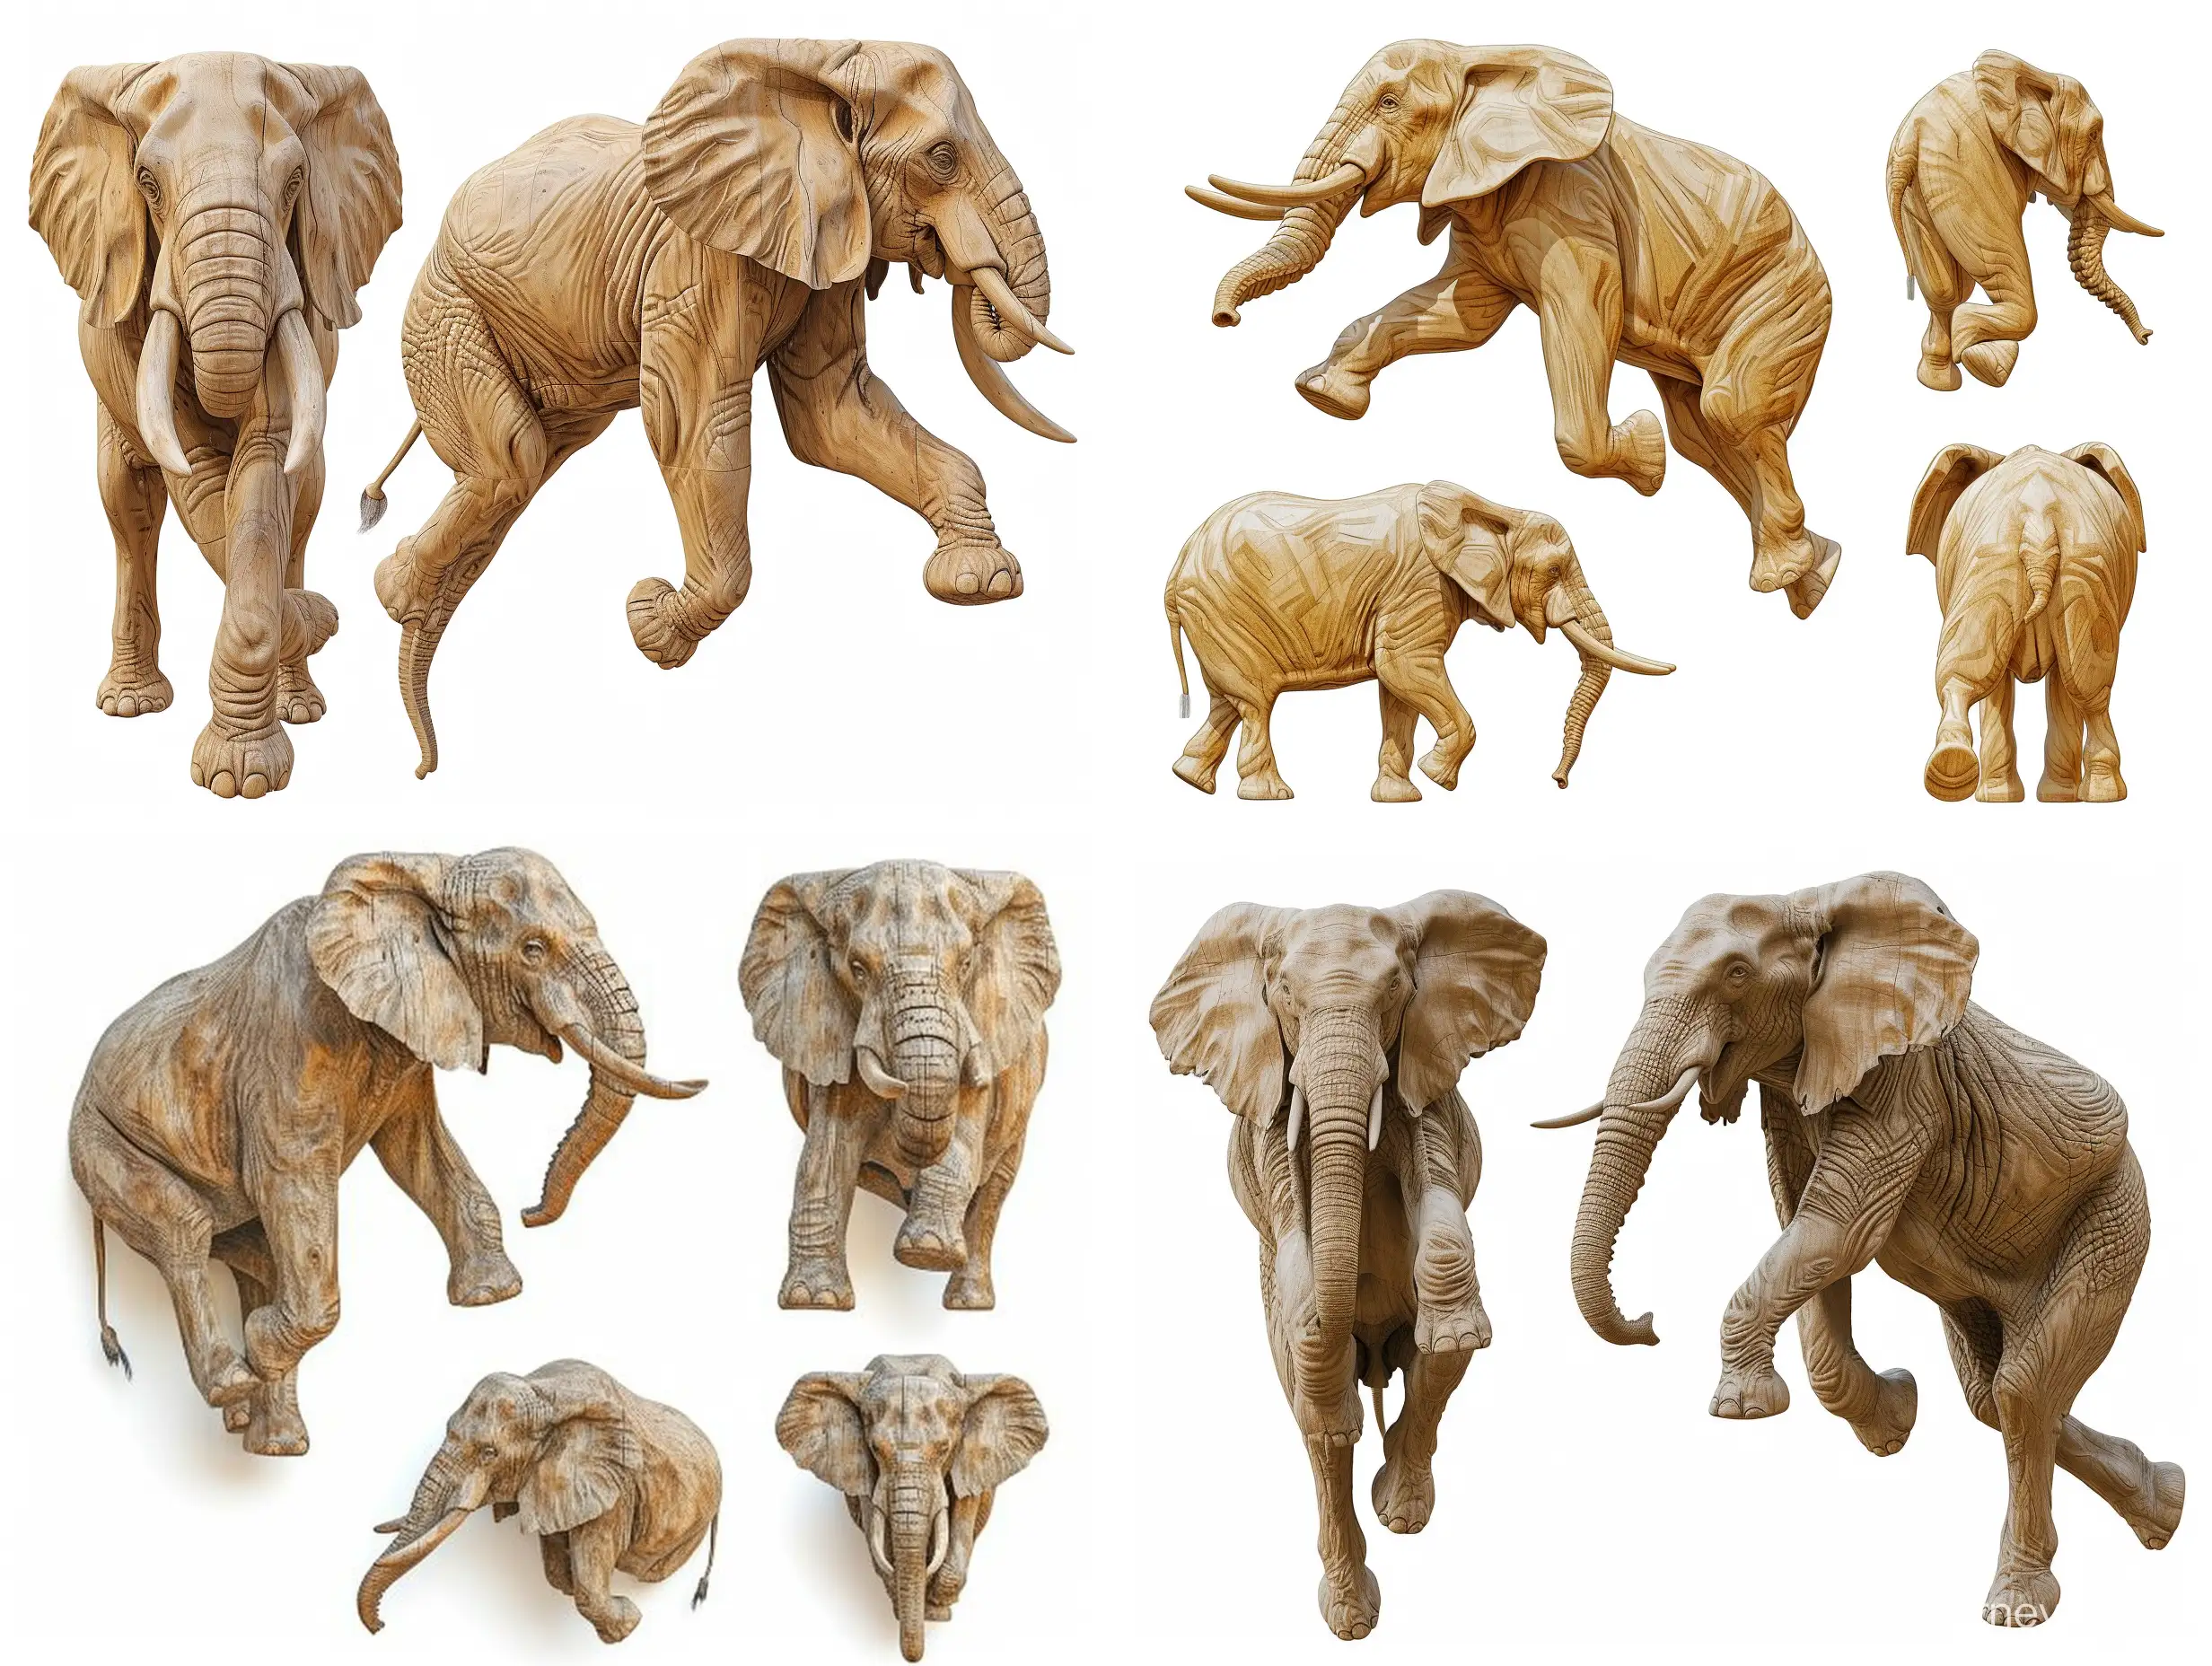 Dynamic-FullLength-Elephant-Wooden-Sculpture-8K-Ultra-Realistic-Carving